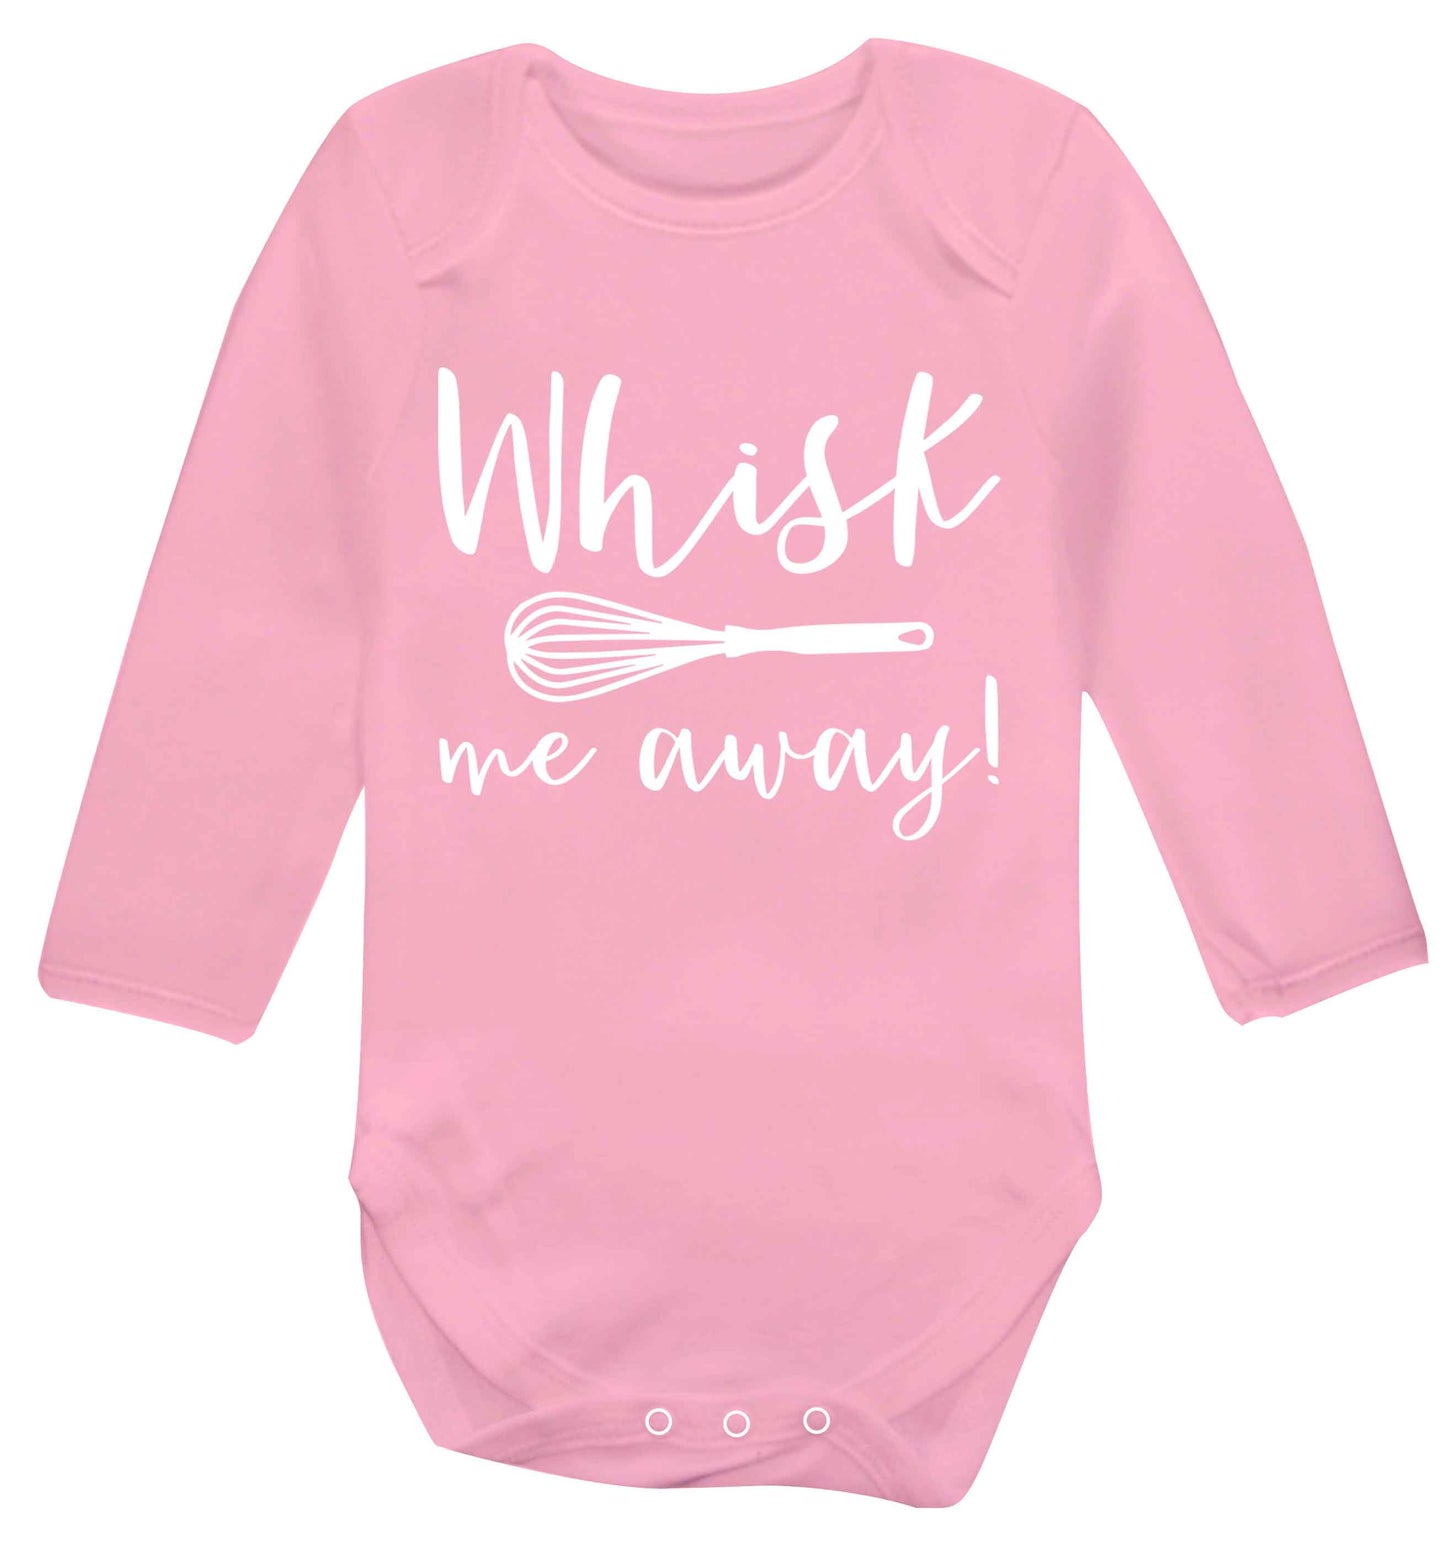 Whisk me away Baby Vest long sleeved pale pink 6-12 months